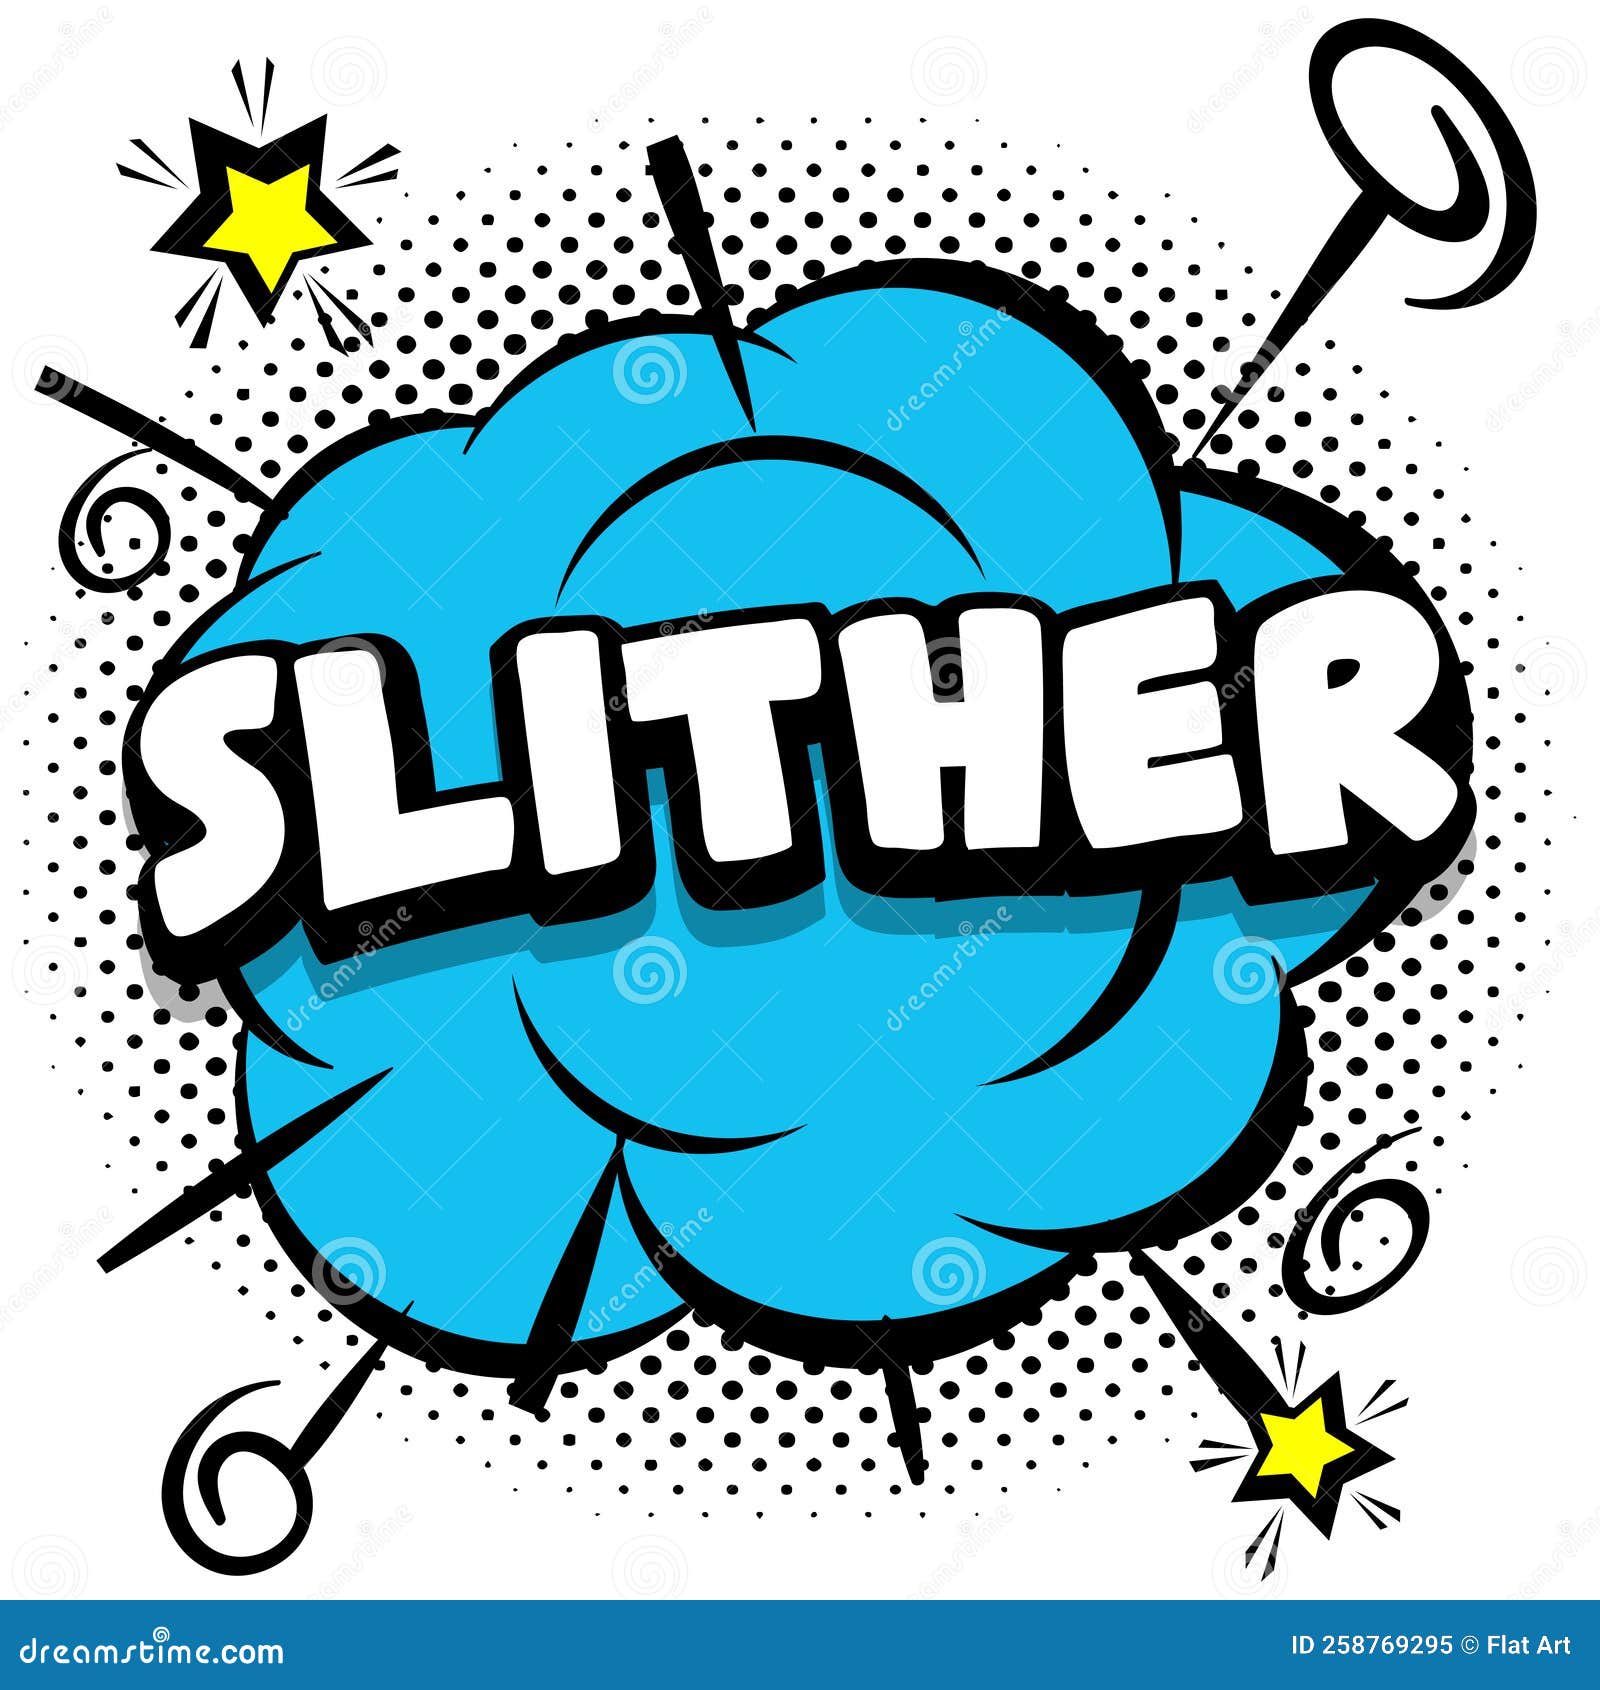 slither comic bright template with speech bubbles on colorful frames